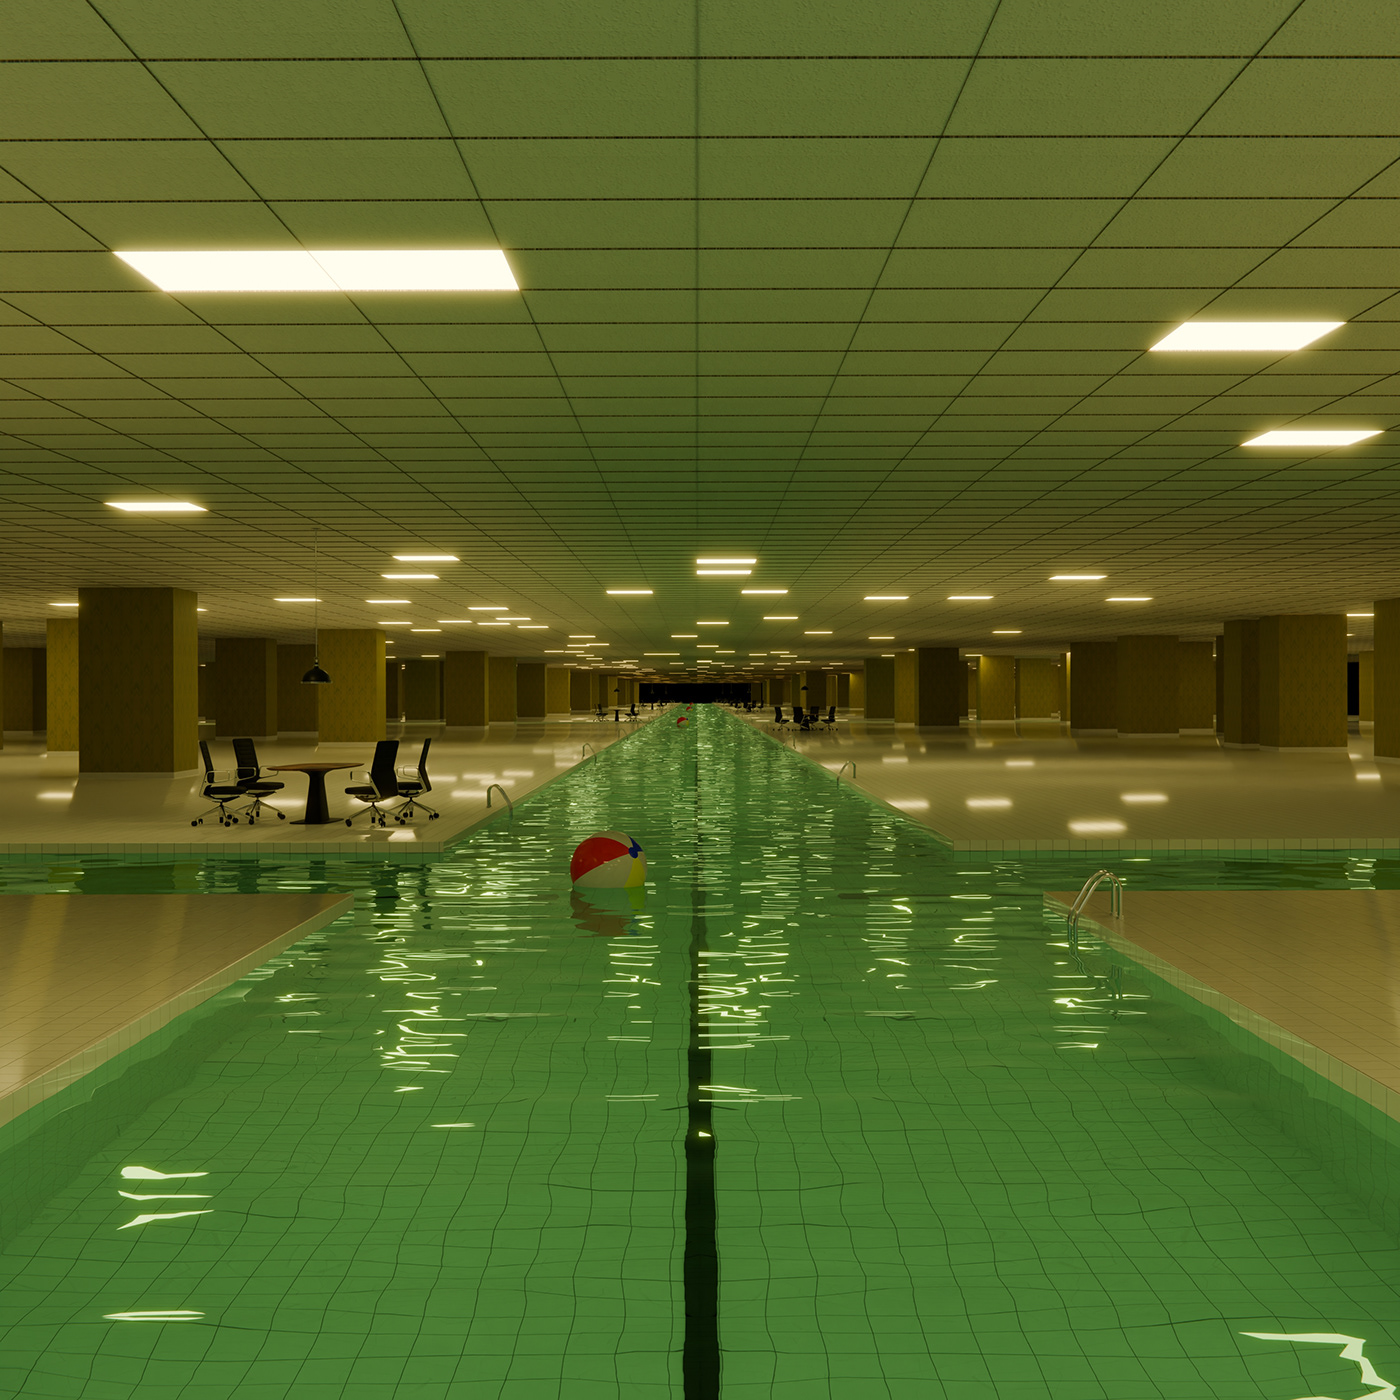 liminal swimming pool dreamcore liminal spaces dreampool poolcore Poolrooms poolside liminal space backrooms